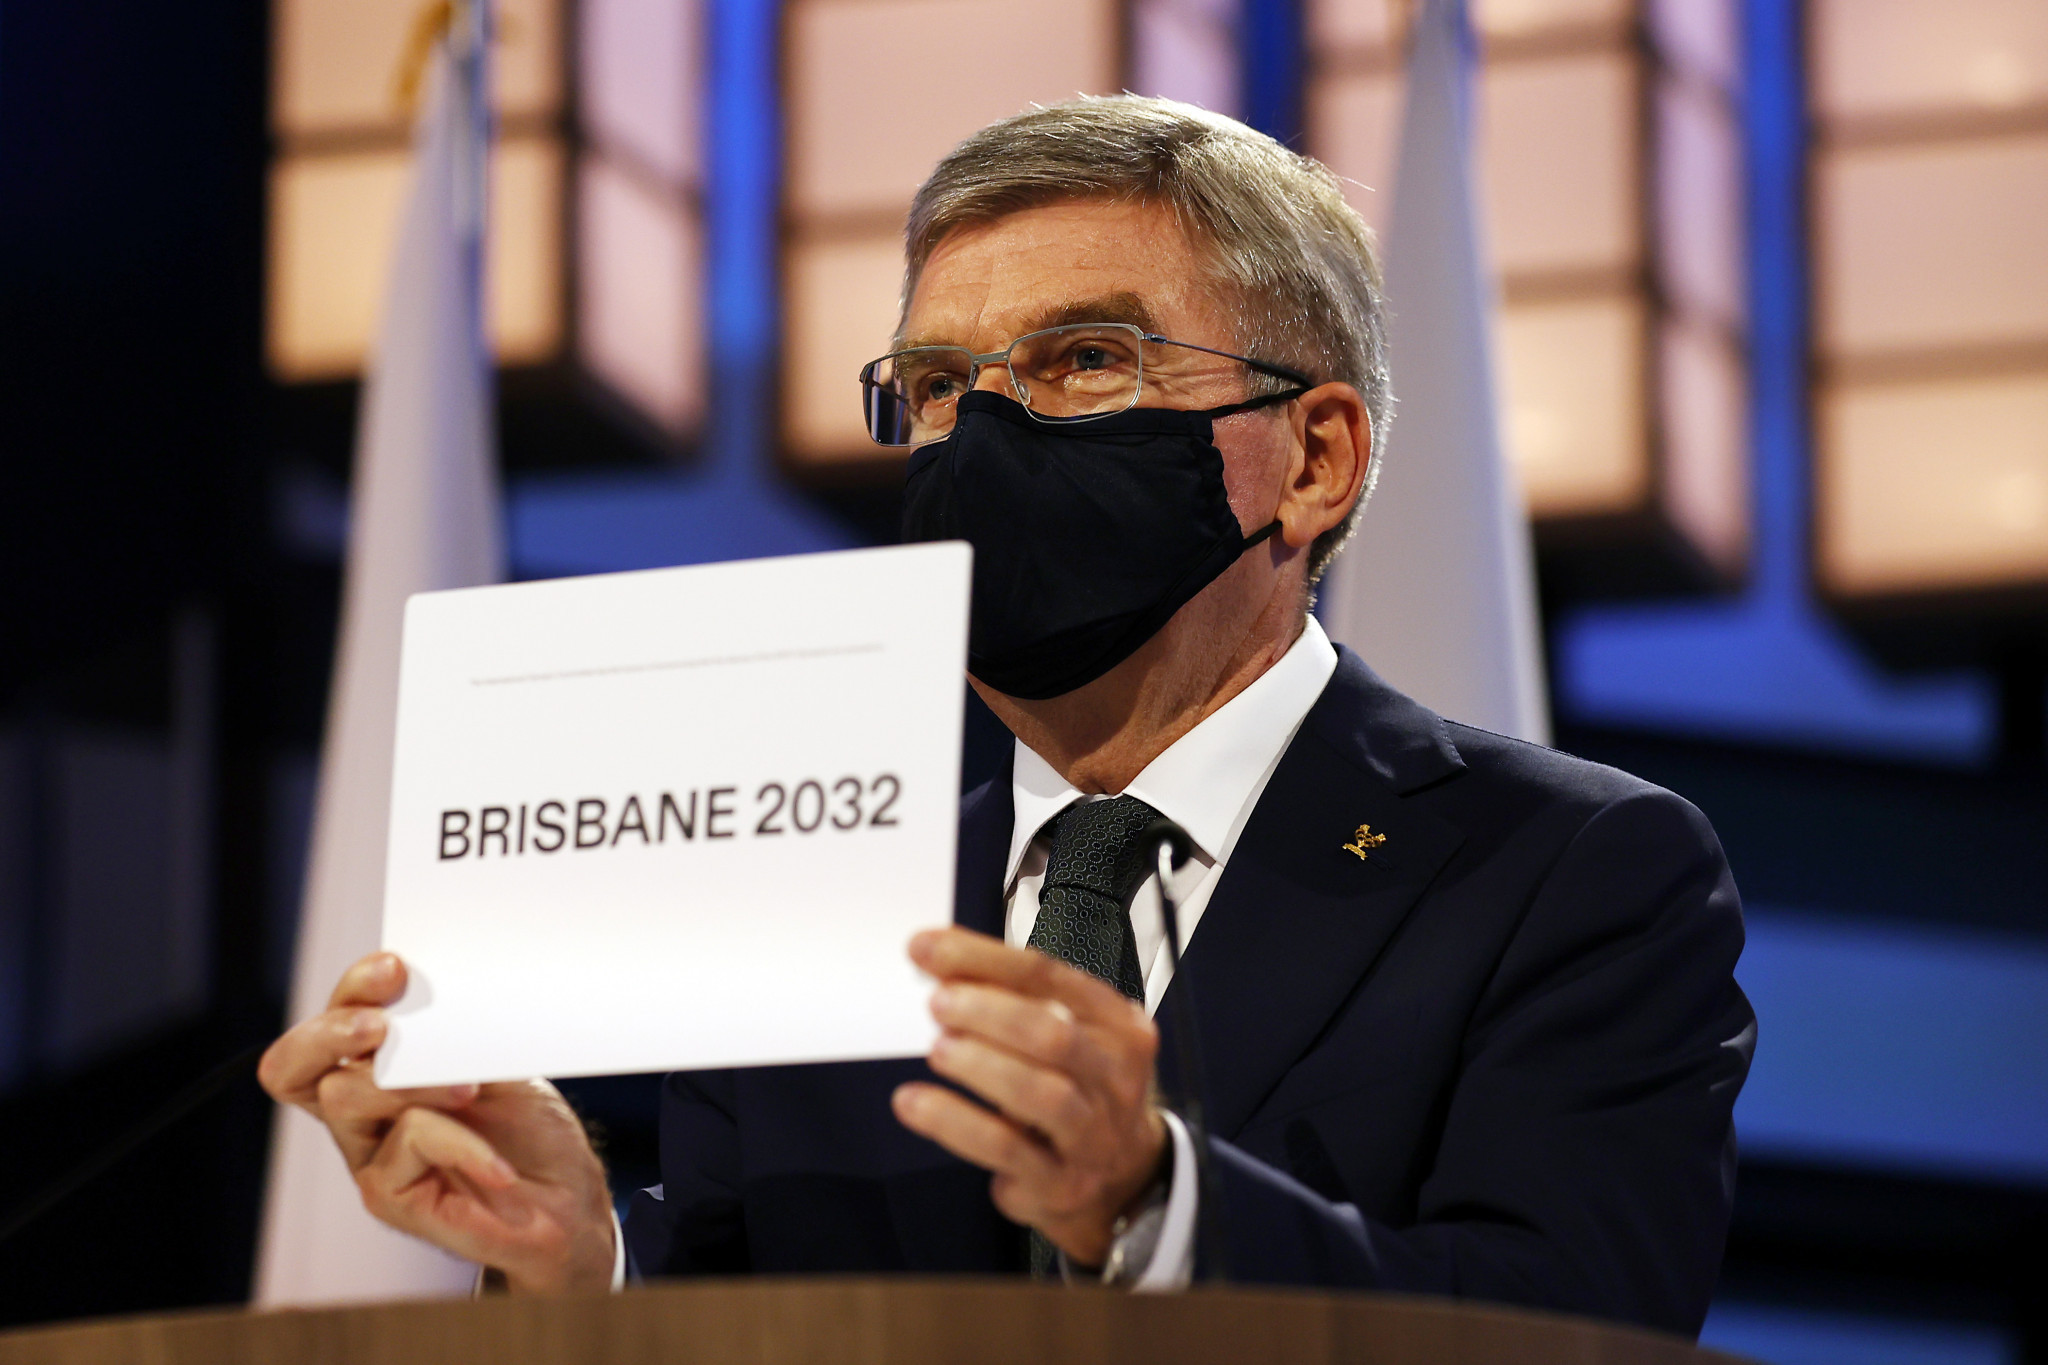 Brisbane 2032 was the first Summer edition of the Olympic Games awarded under the IOC's new approach ©Getty Images